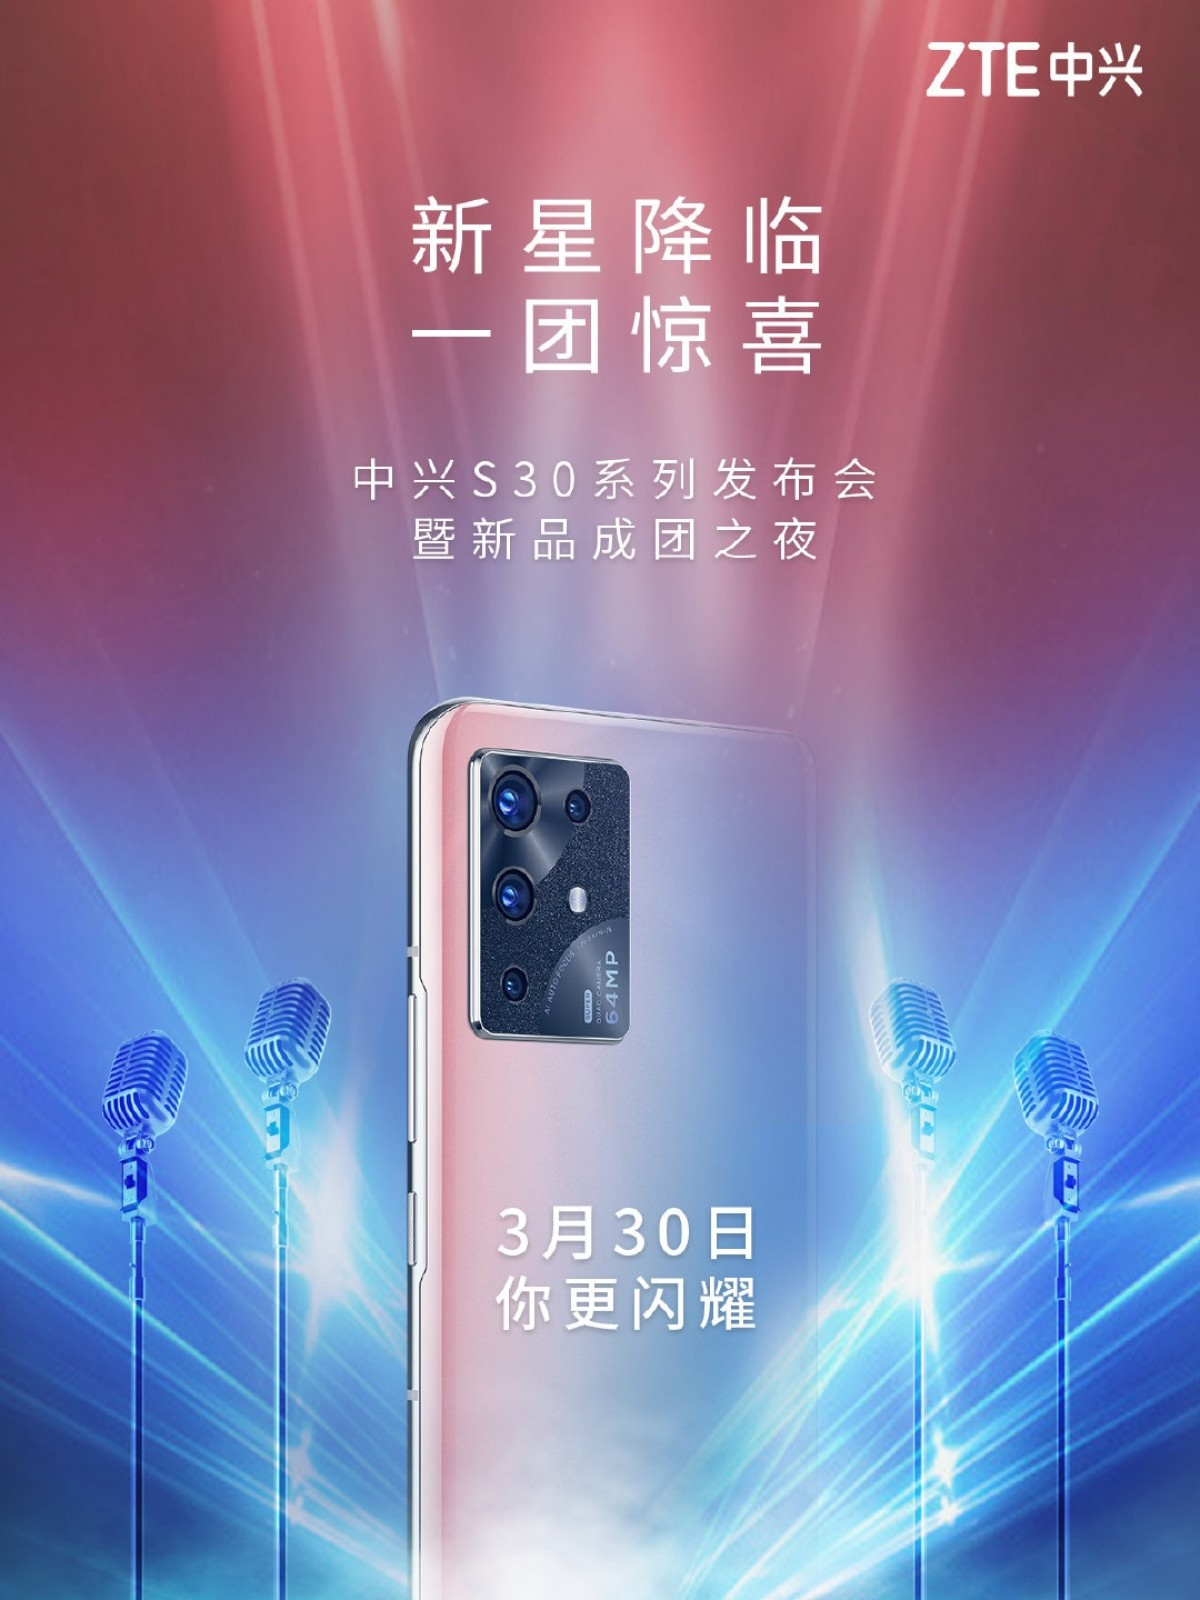 ZTE S30 Pro to arrive on March 30 with 144Hz screen and 44MP selfie